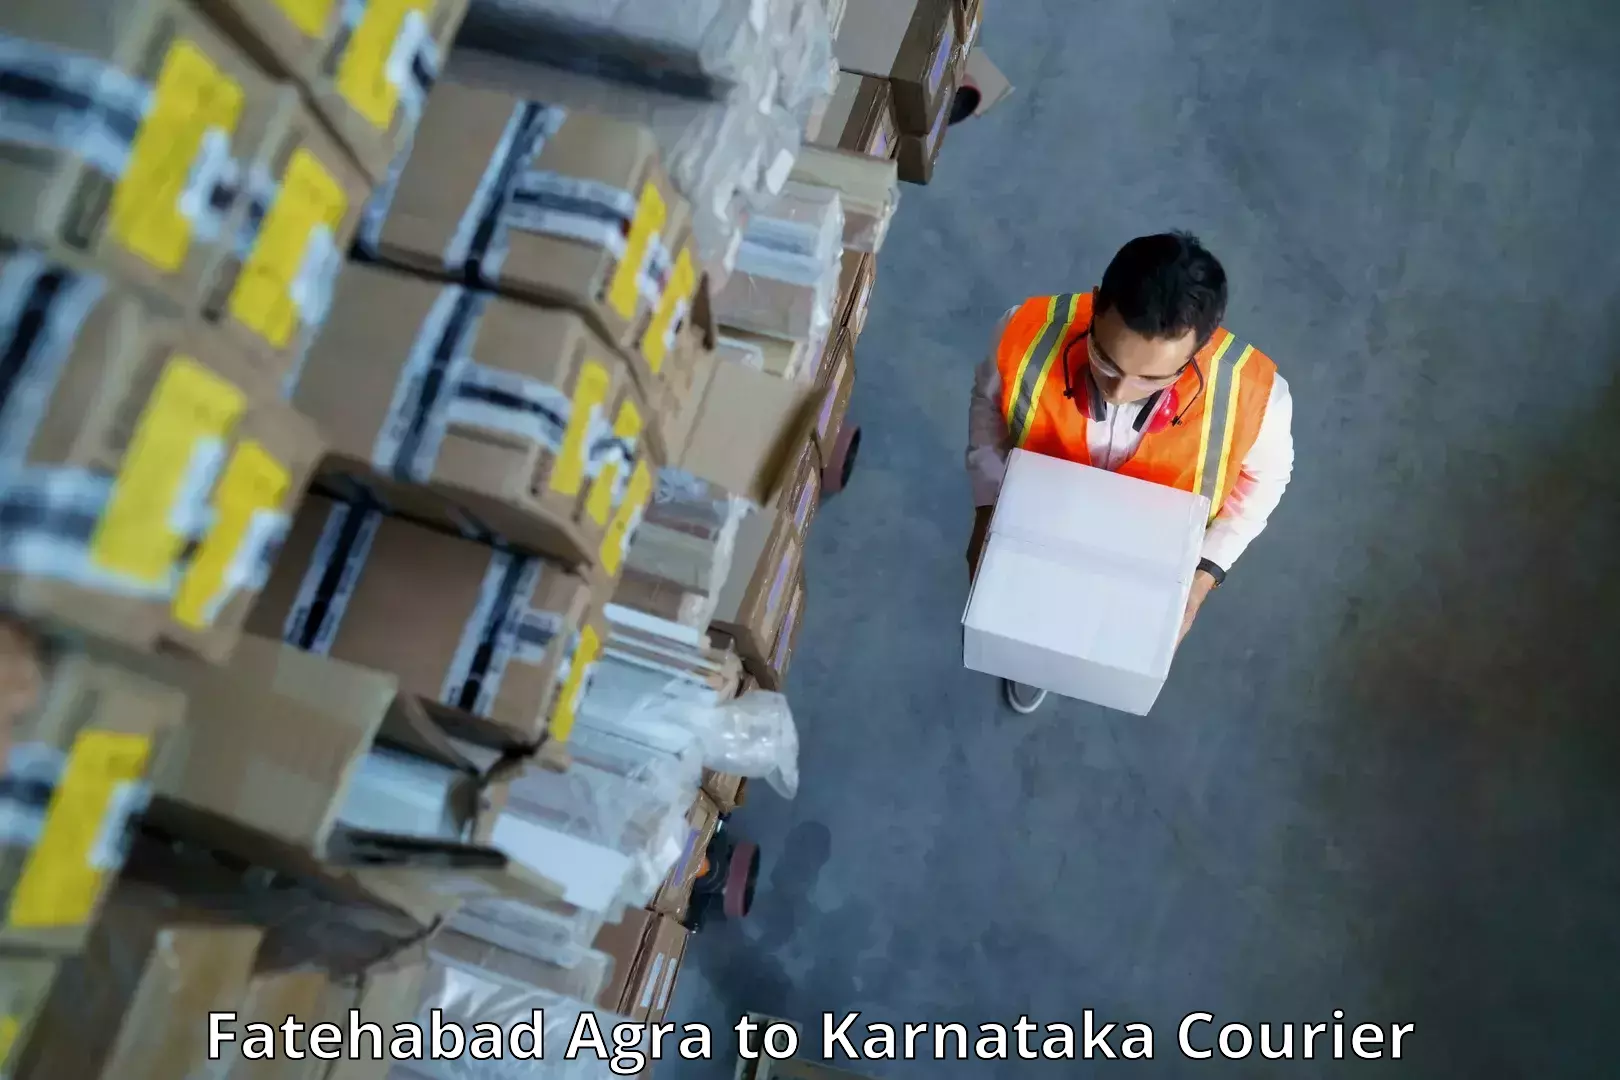 Professional courier handling Fatehabad Agra to Gurmatkal